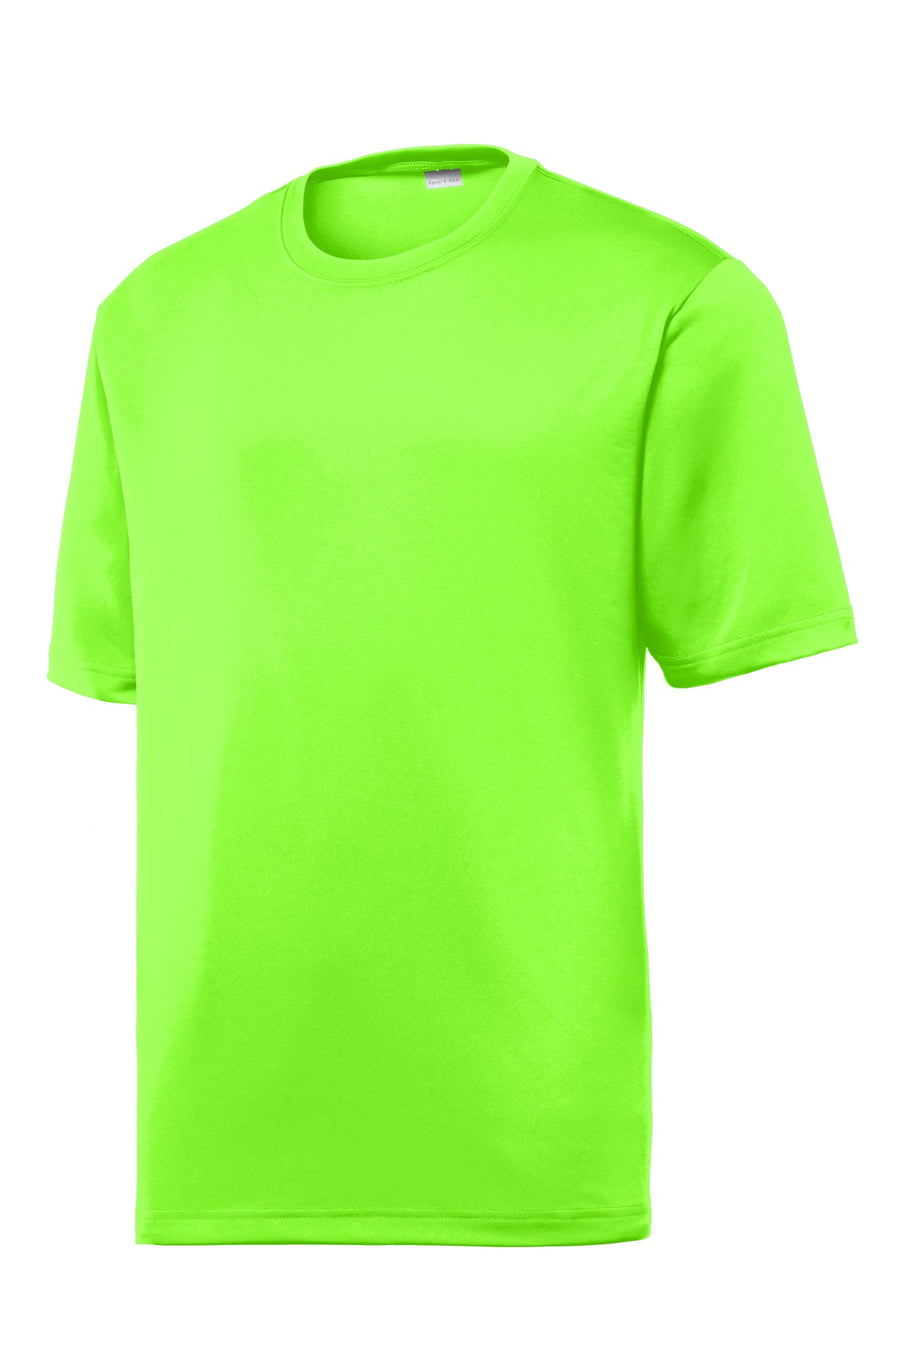 ST320-Neon Green-front_flat